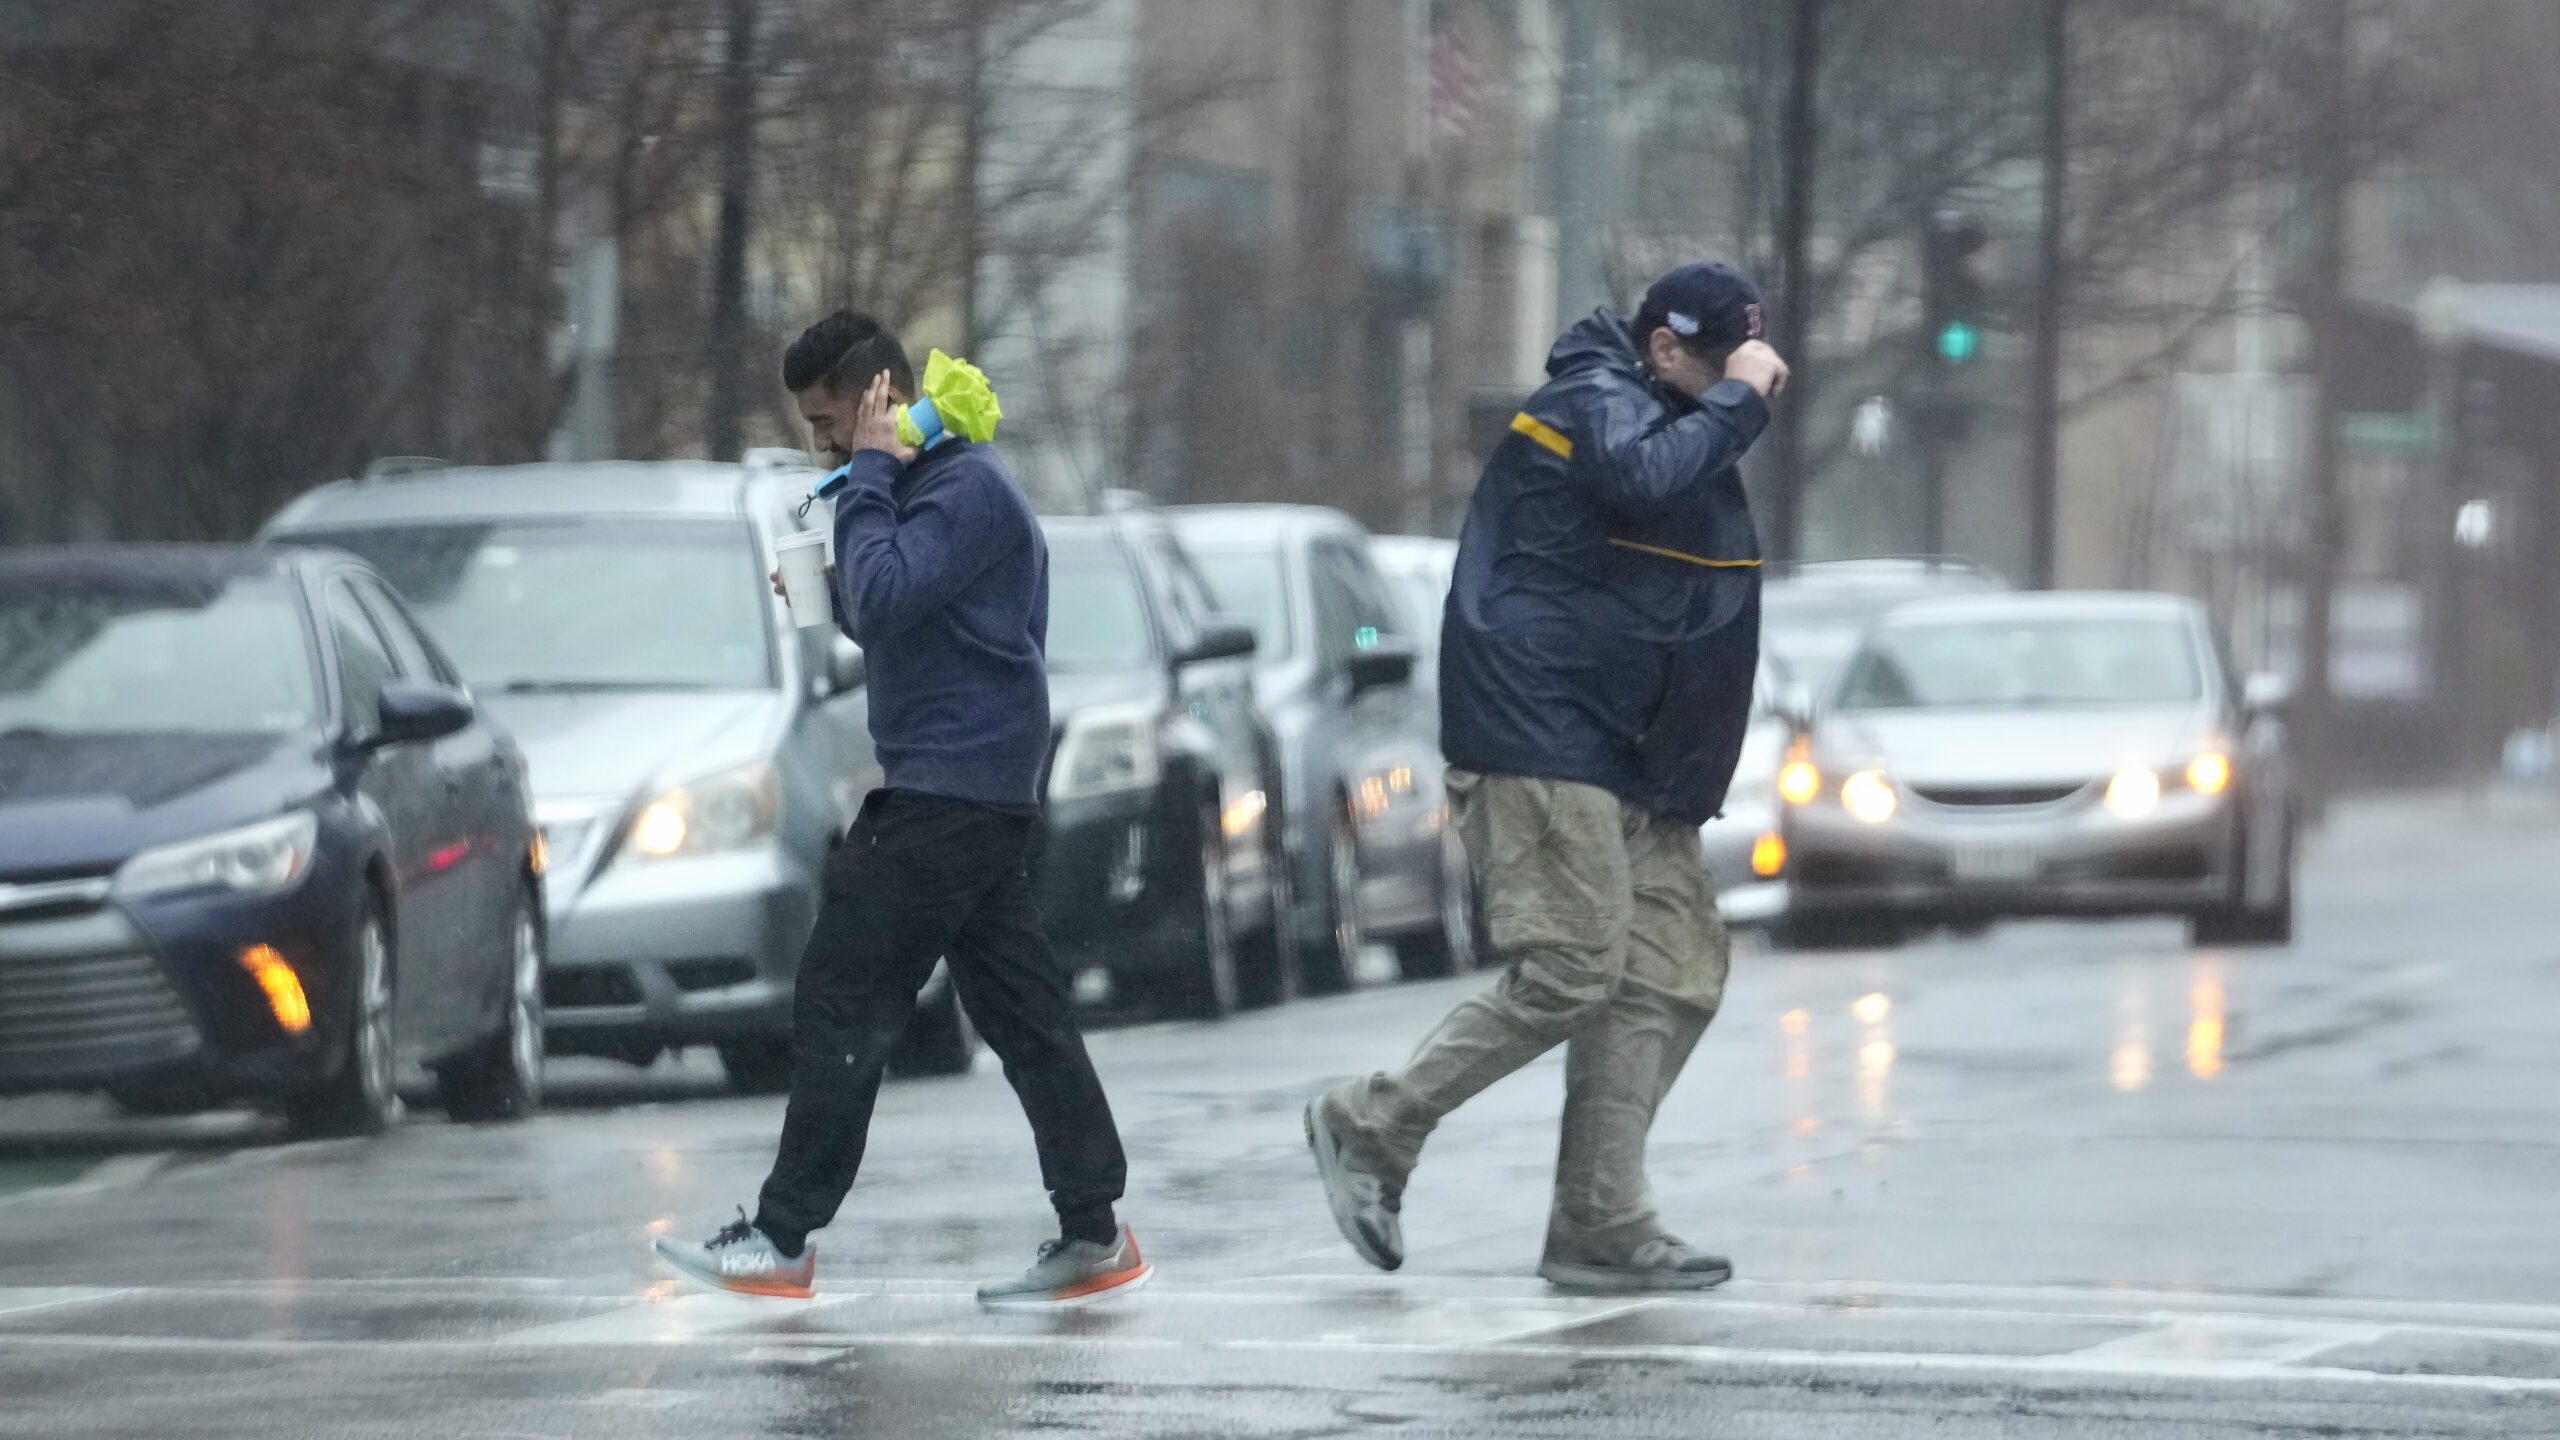 Pedestrians are buffeted by wind as they cross a street Monday in Boston.